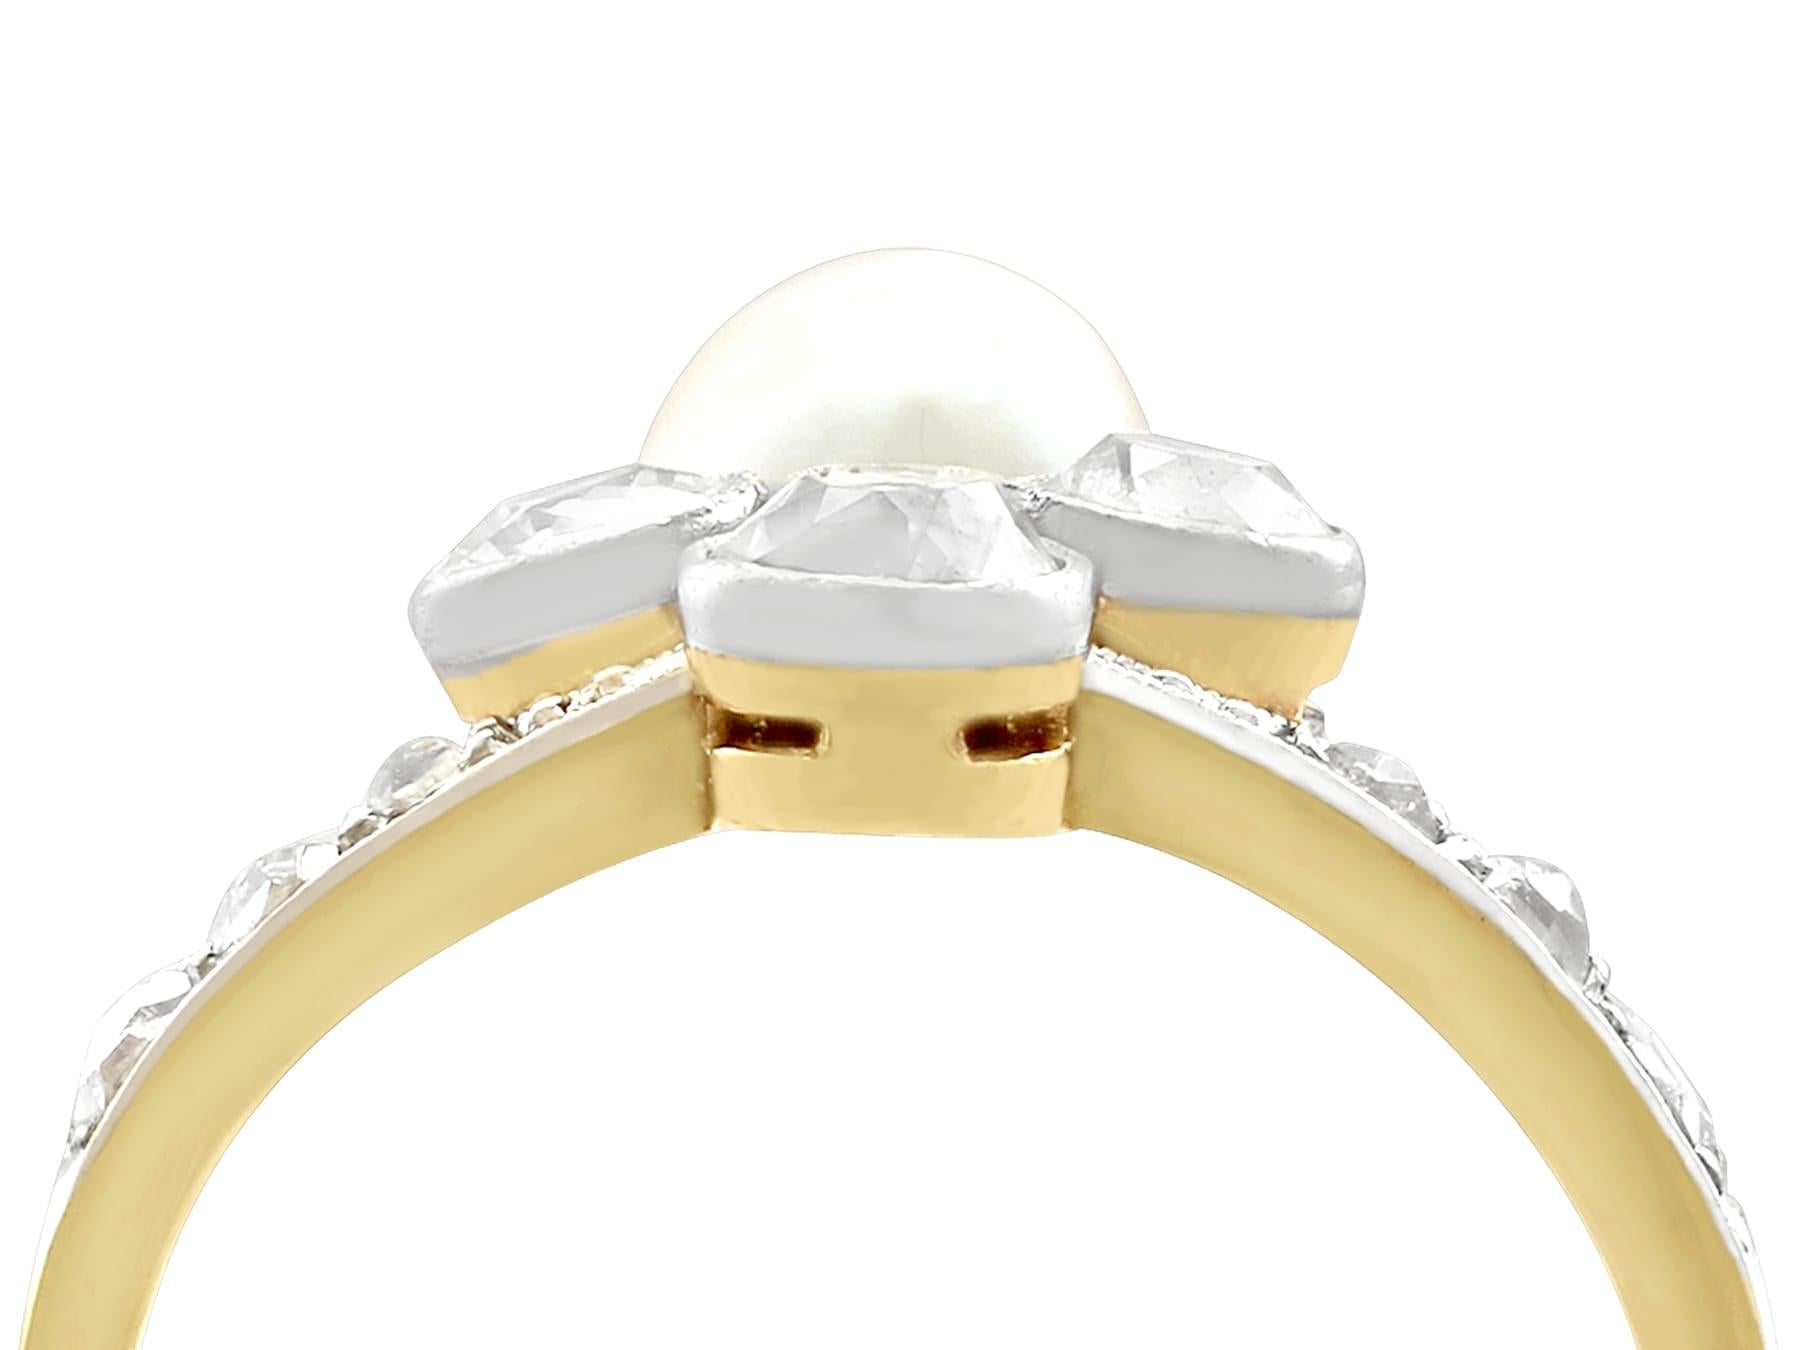 A stunning, fine and impressive antique 1.02 carat diamond and pearl, 14 karat yellow gold, platinum set dress ring; part of our antique jewelry and estate jewelry collections.

This stunning antique pearl and diamond cocktail ring has been crafted